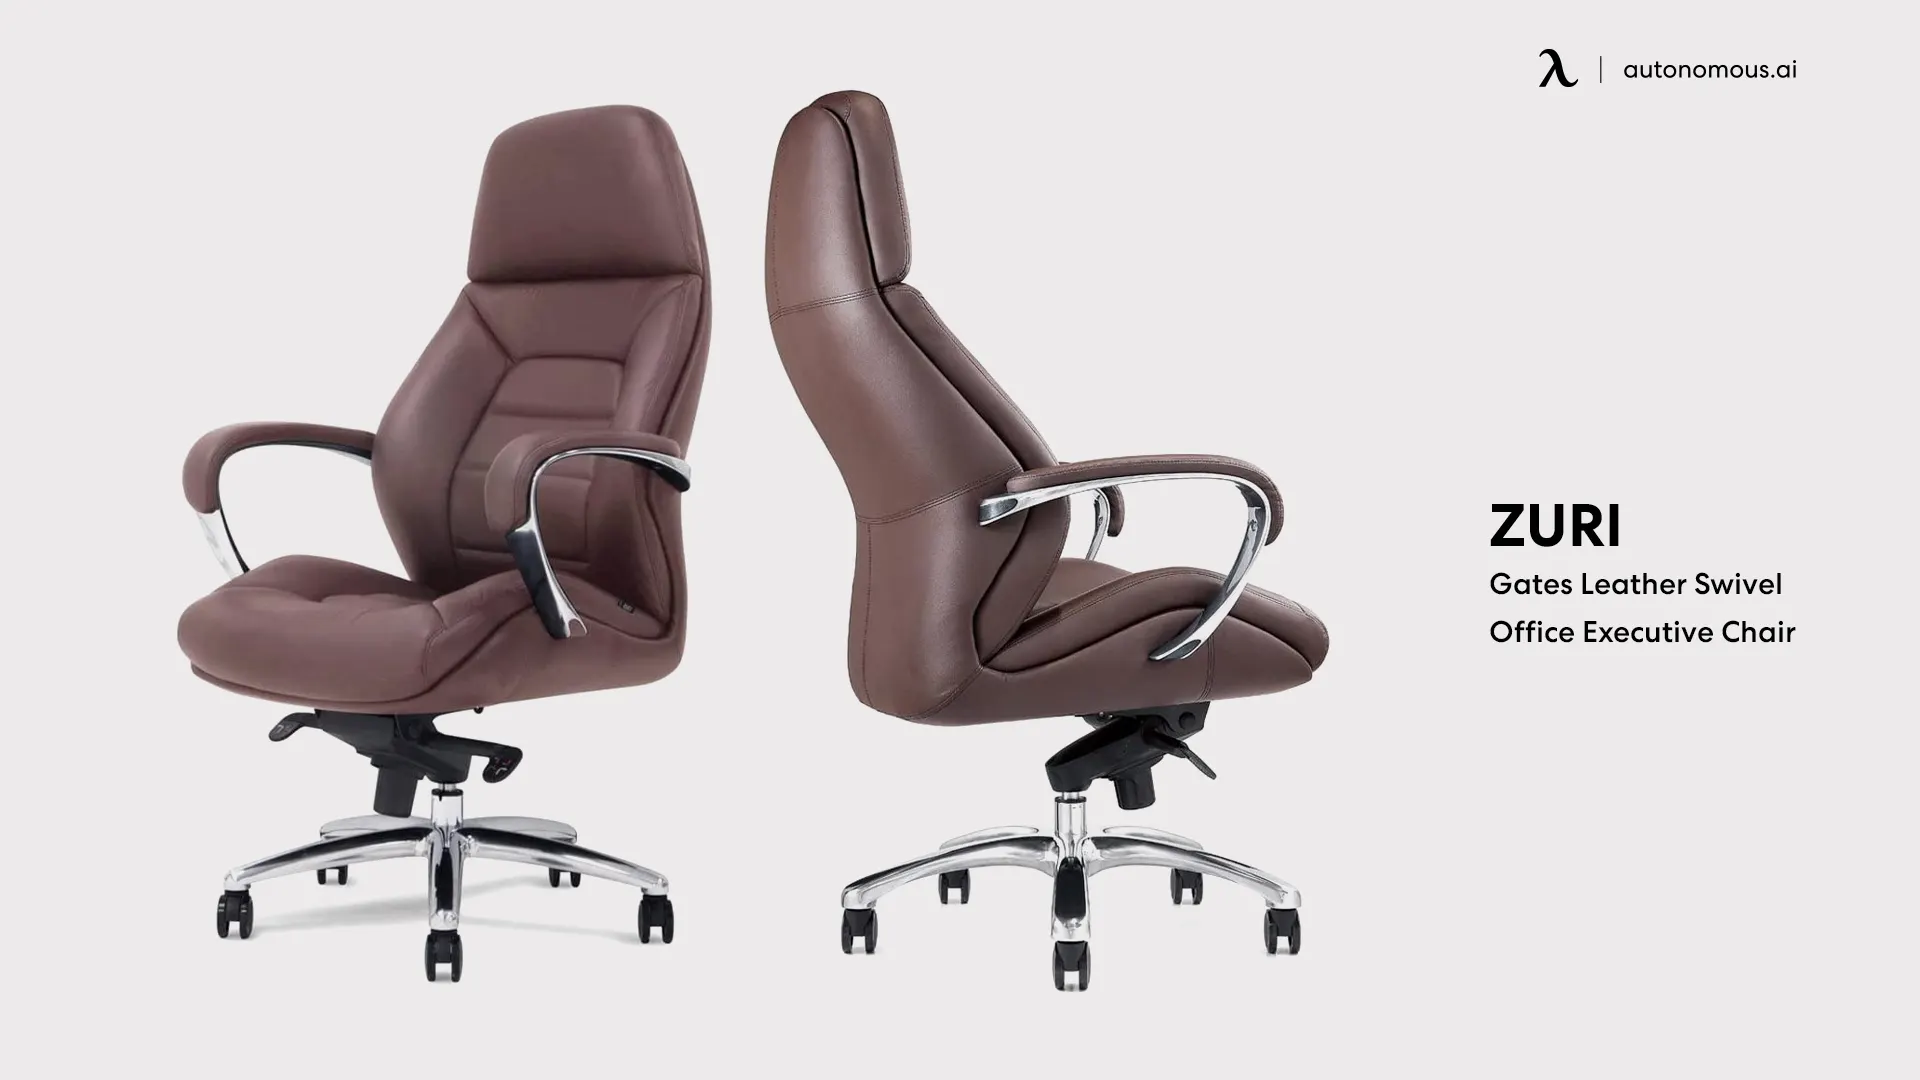 Gates Leather Swivel Office Executive Chair